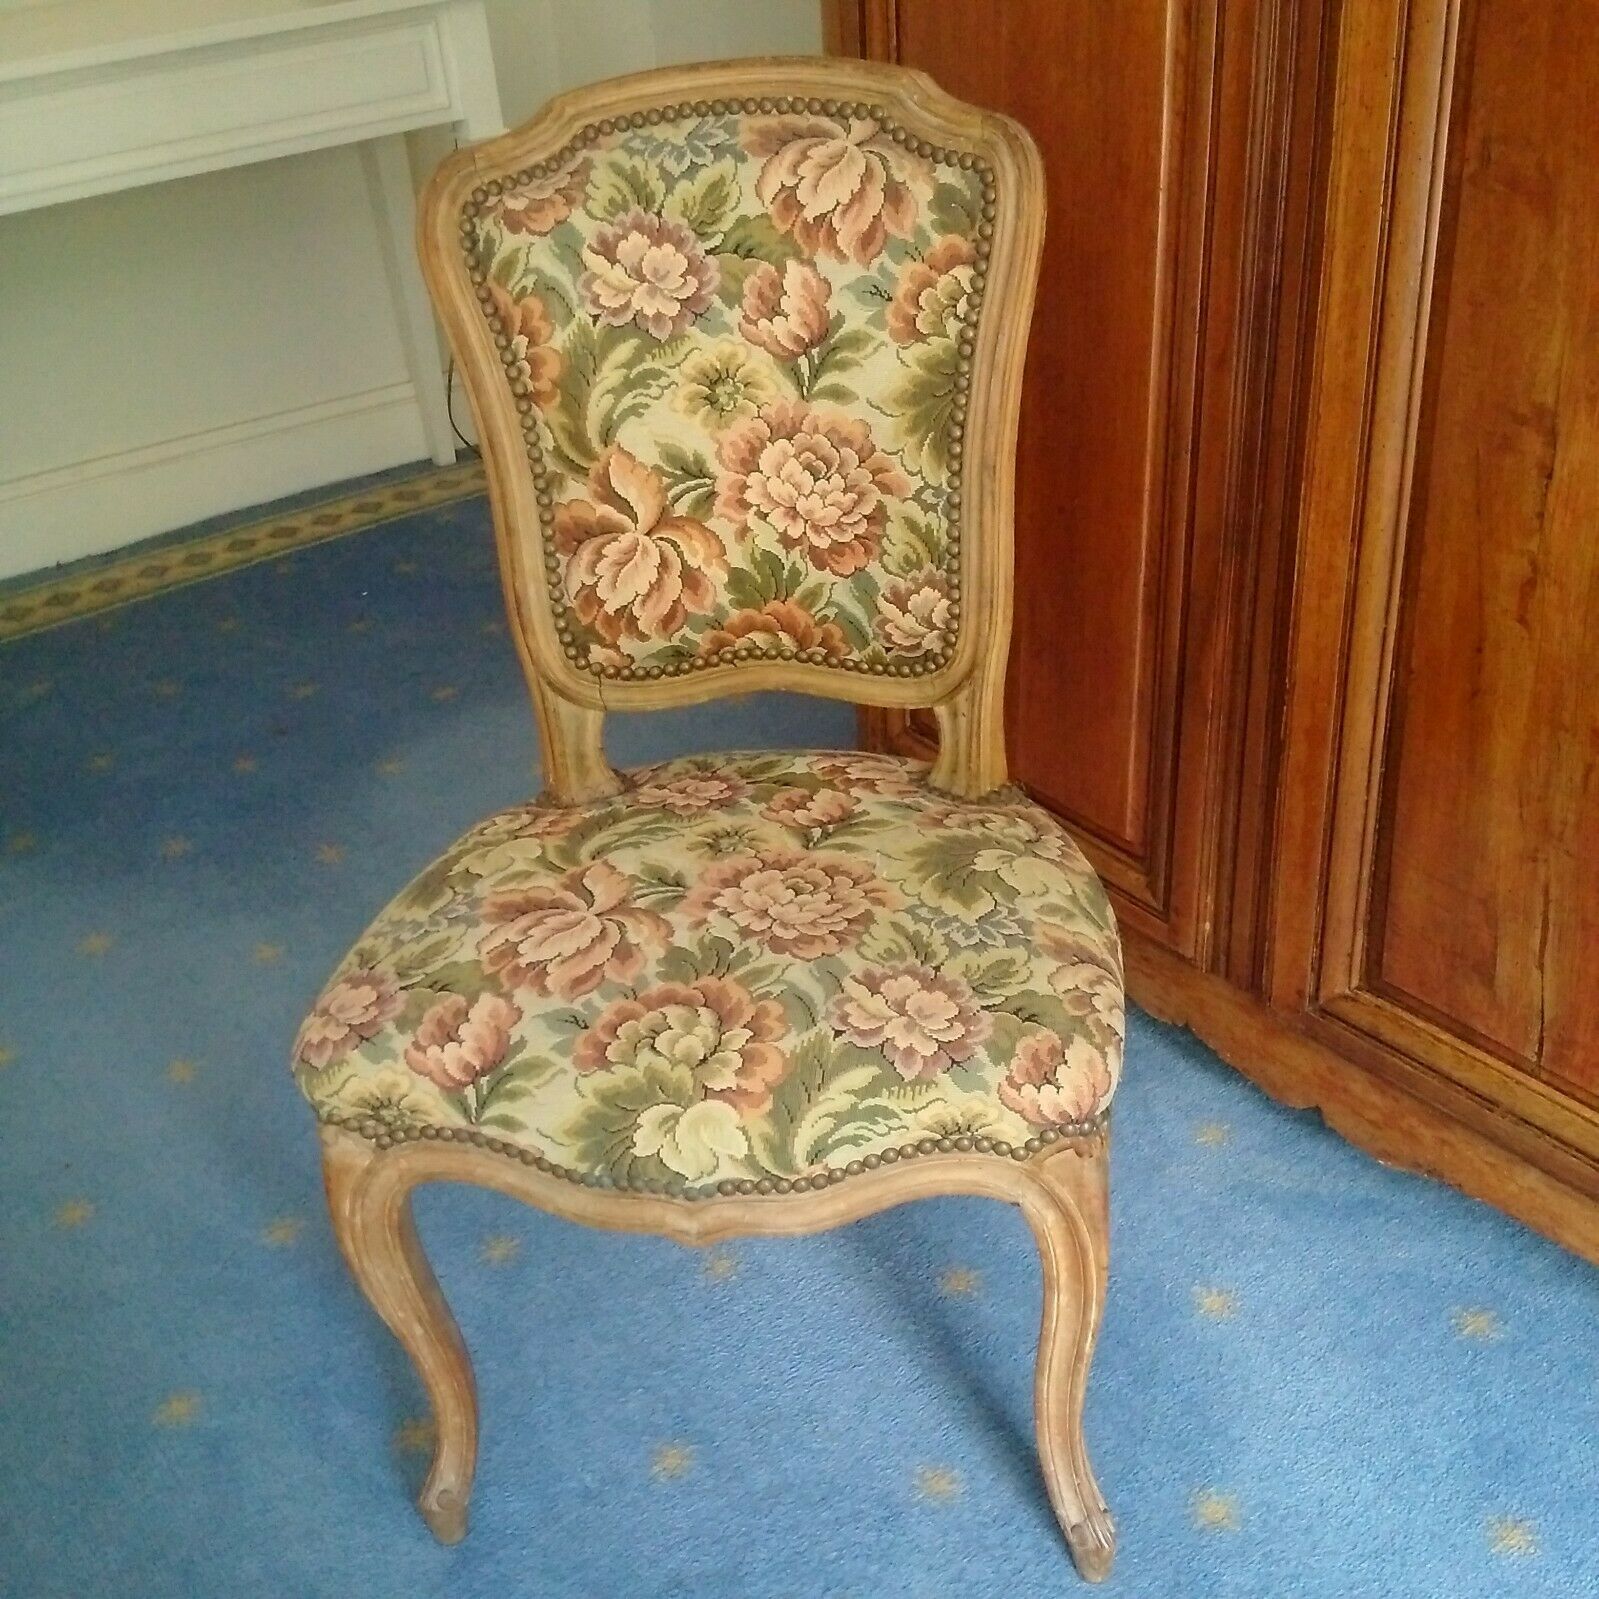 Antique Valuations: LOUIS XV STYLE CHAIR OAK FRAME TAPESTRY UPHOLSTERY PARLOR STYLE